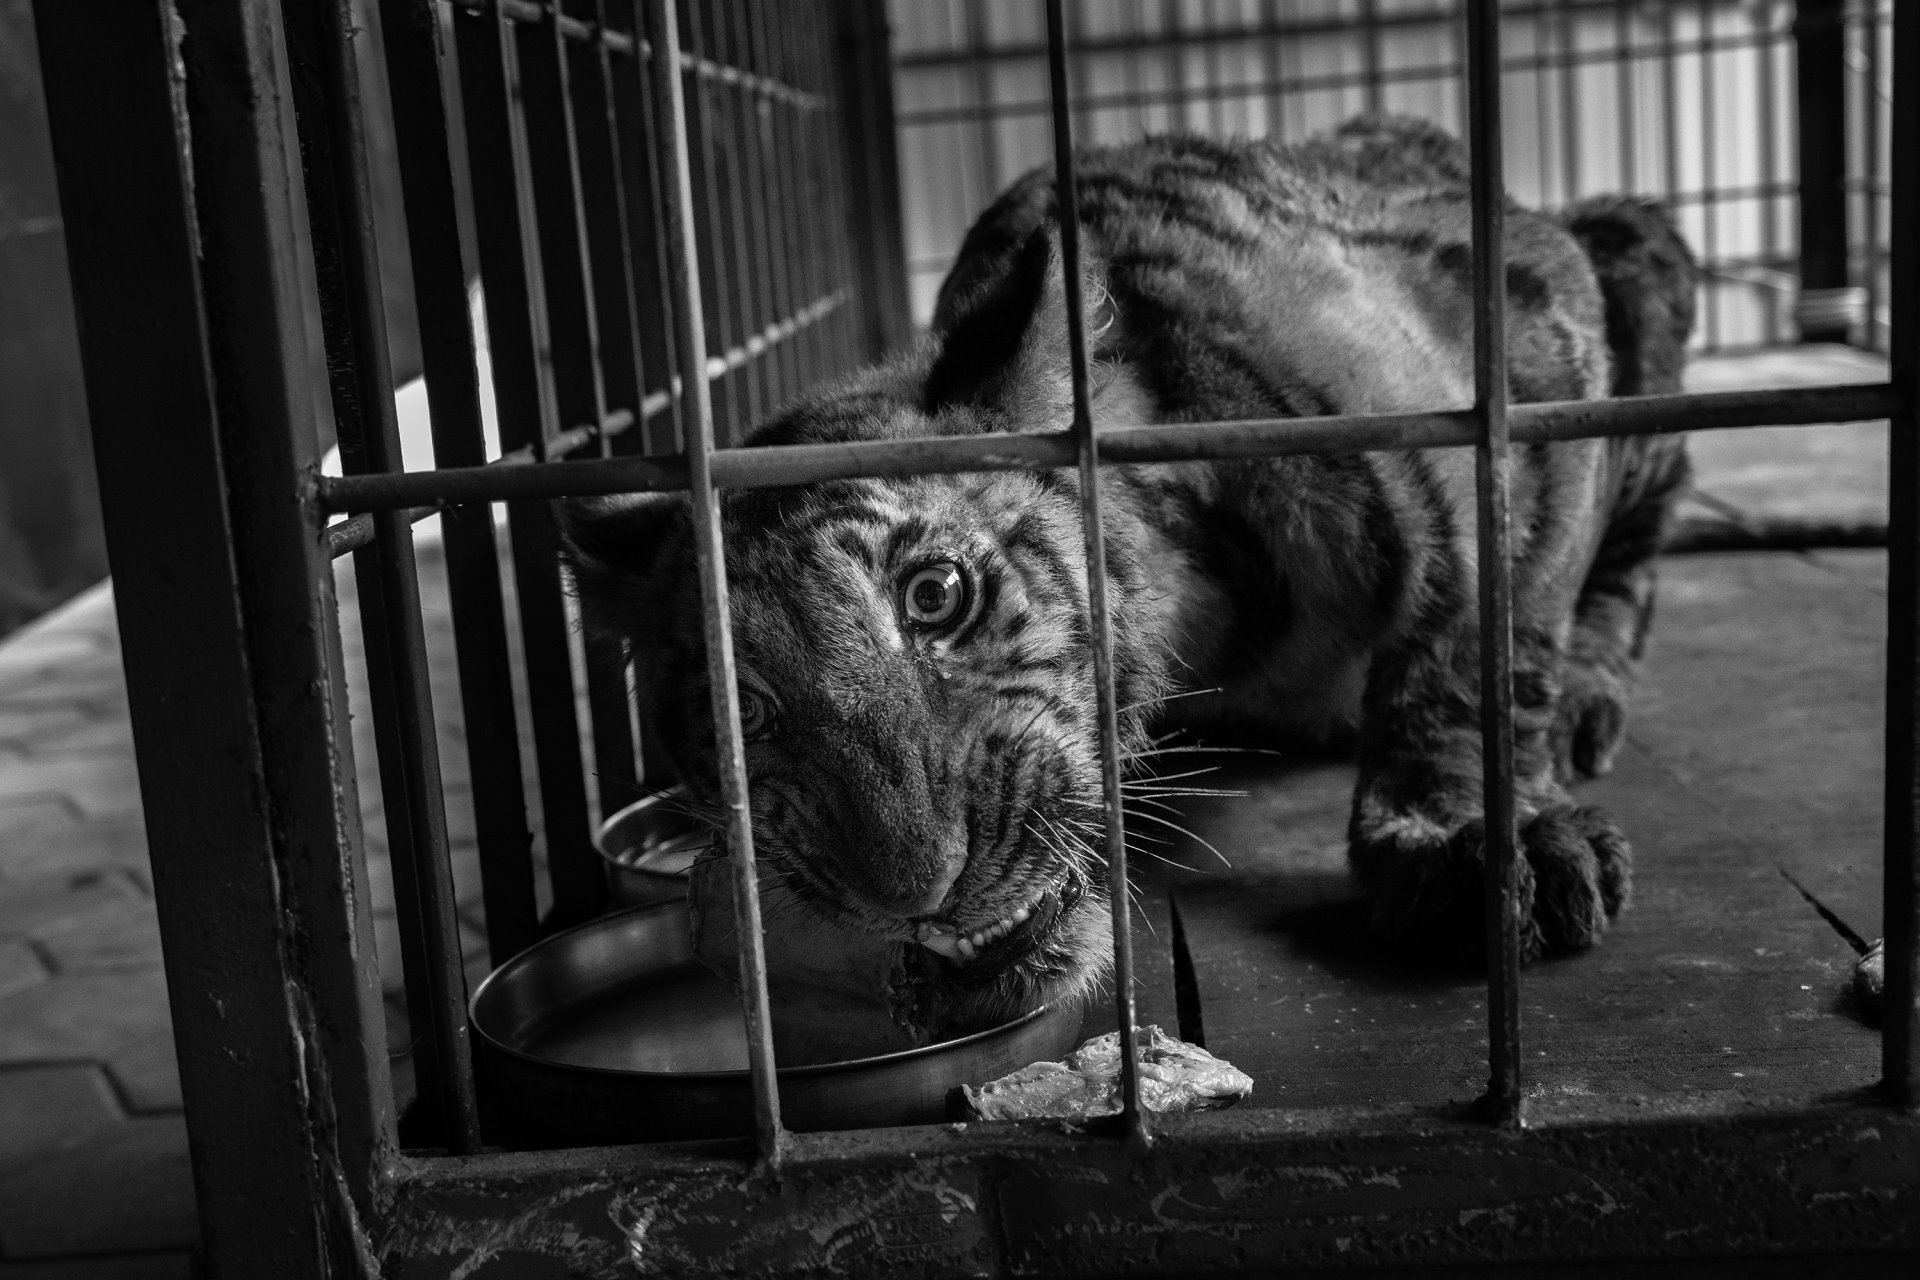 <p>A nine-month-old tiger cub lies in a cage after being recovered in Valparai, near the Anamalai Tiger Reserve, Tamil Nadu, India. Valparai, where large parts of forest have been cleared to make way for tea plantations, is a high human-animal conflict zone.</p>
